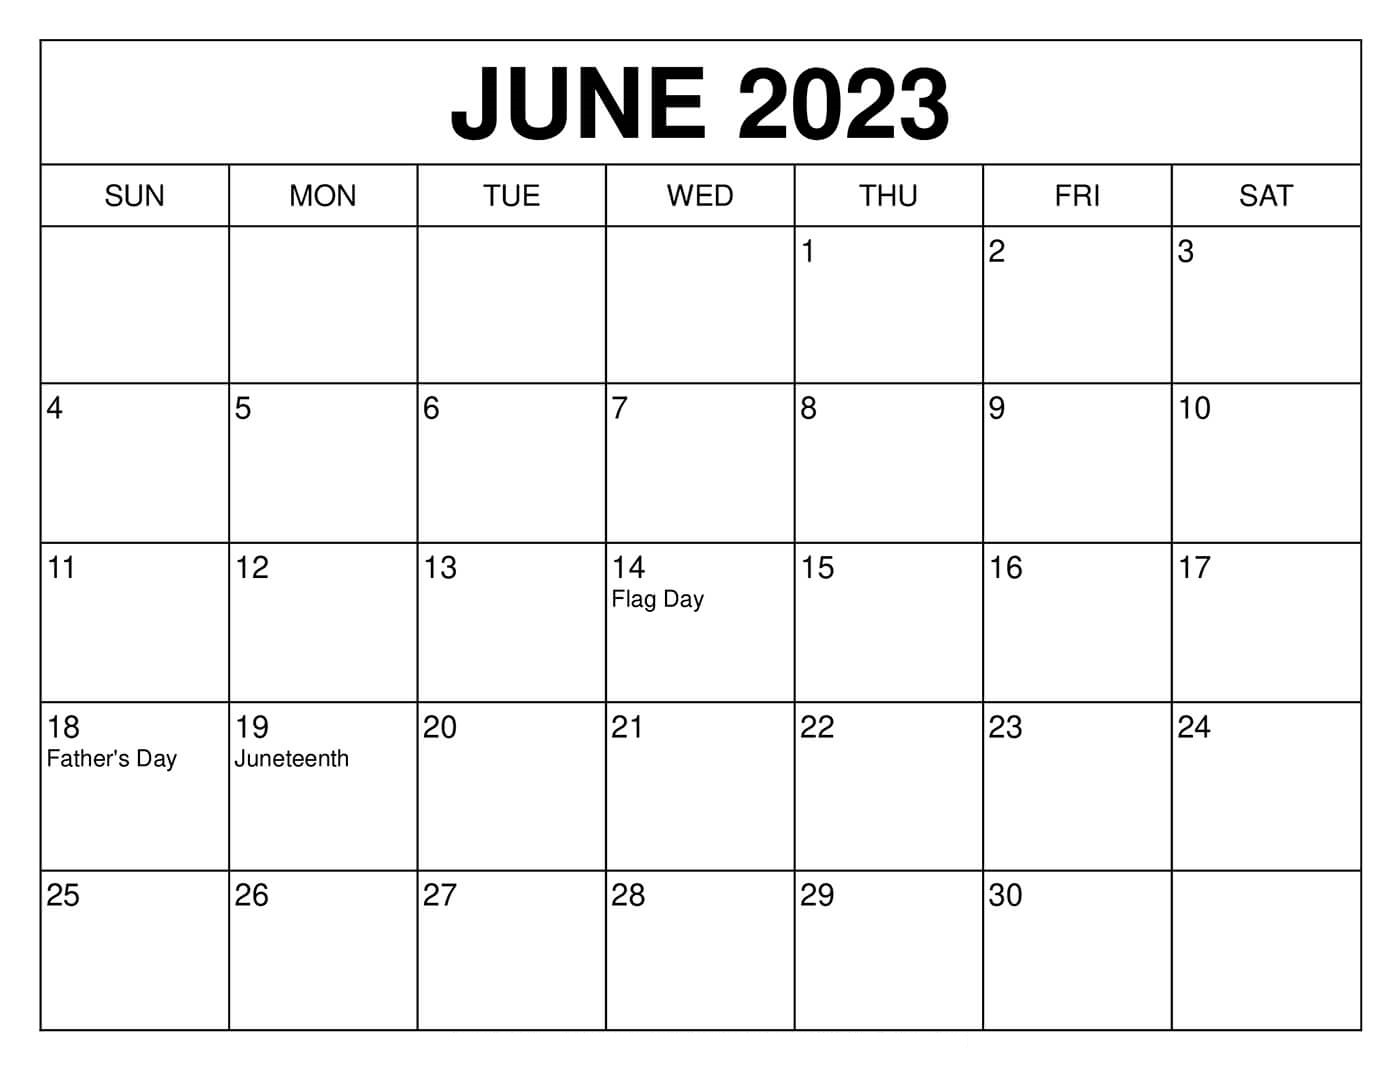 Free Printable June 2023 Calendar Templates with Holidays